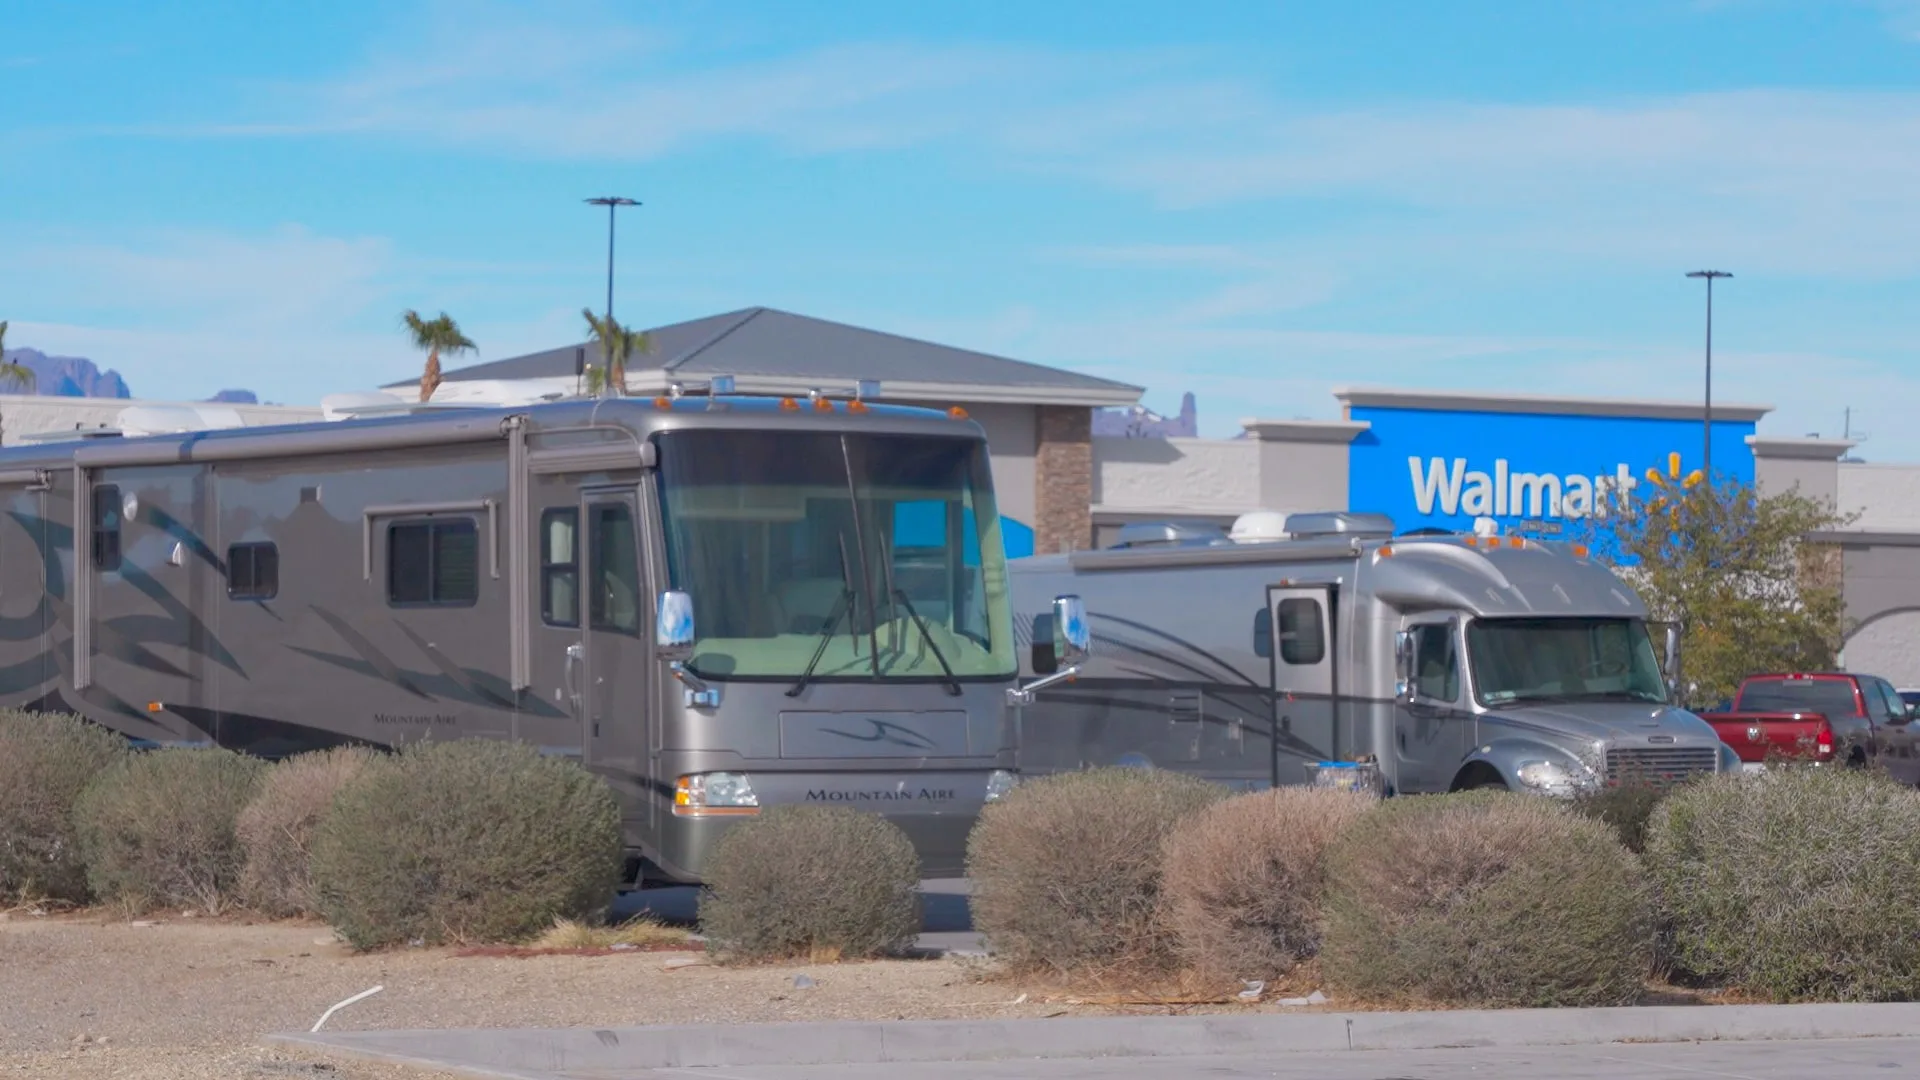 Walmarts are a great fre overnight rv parking location